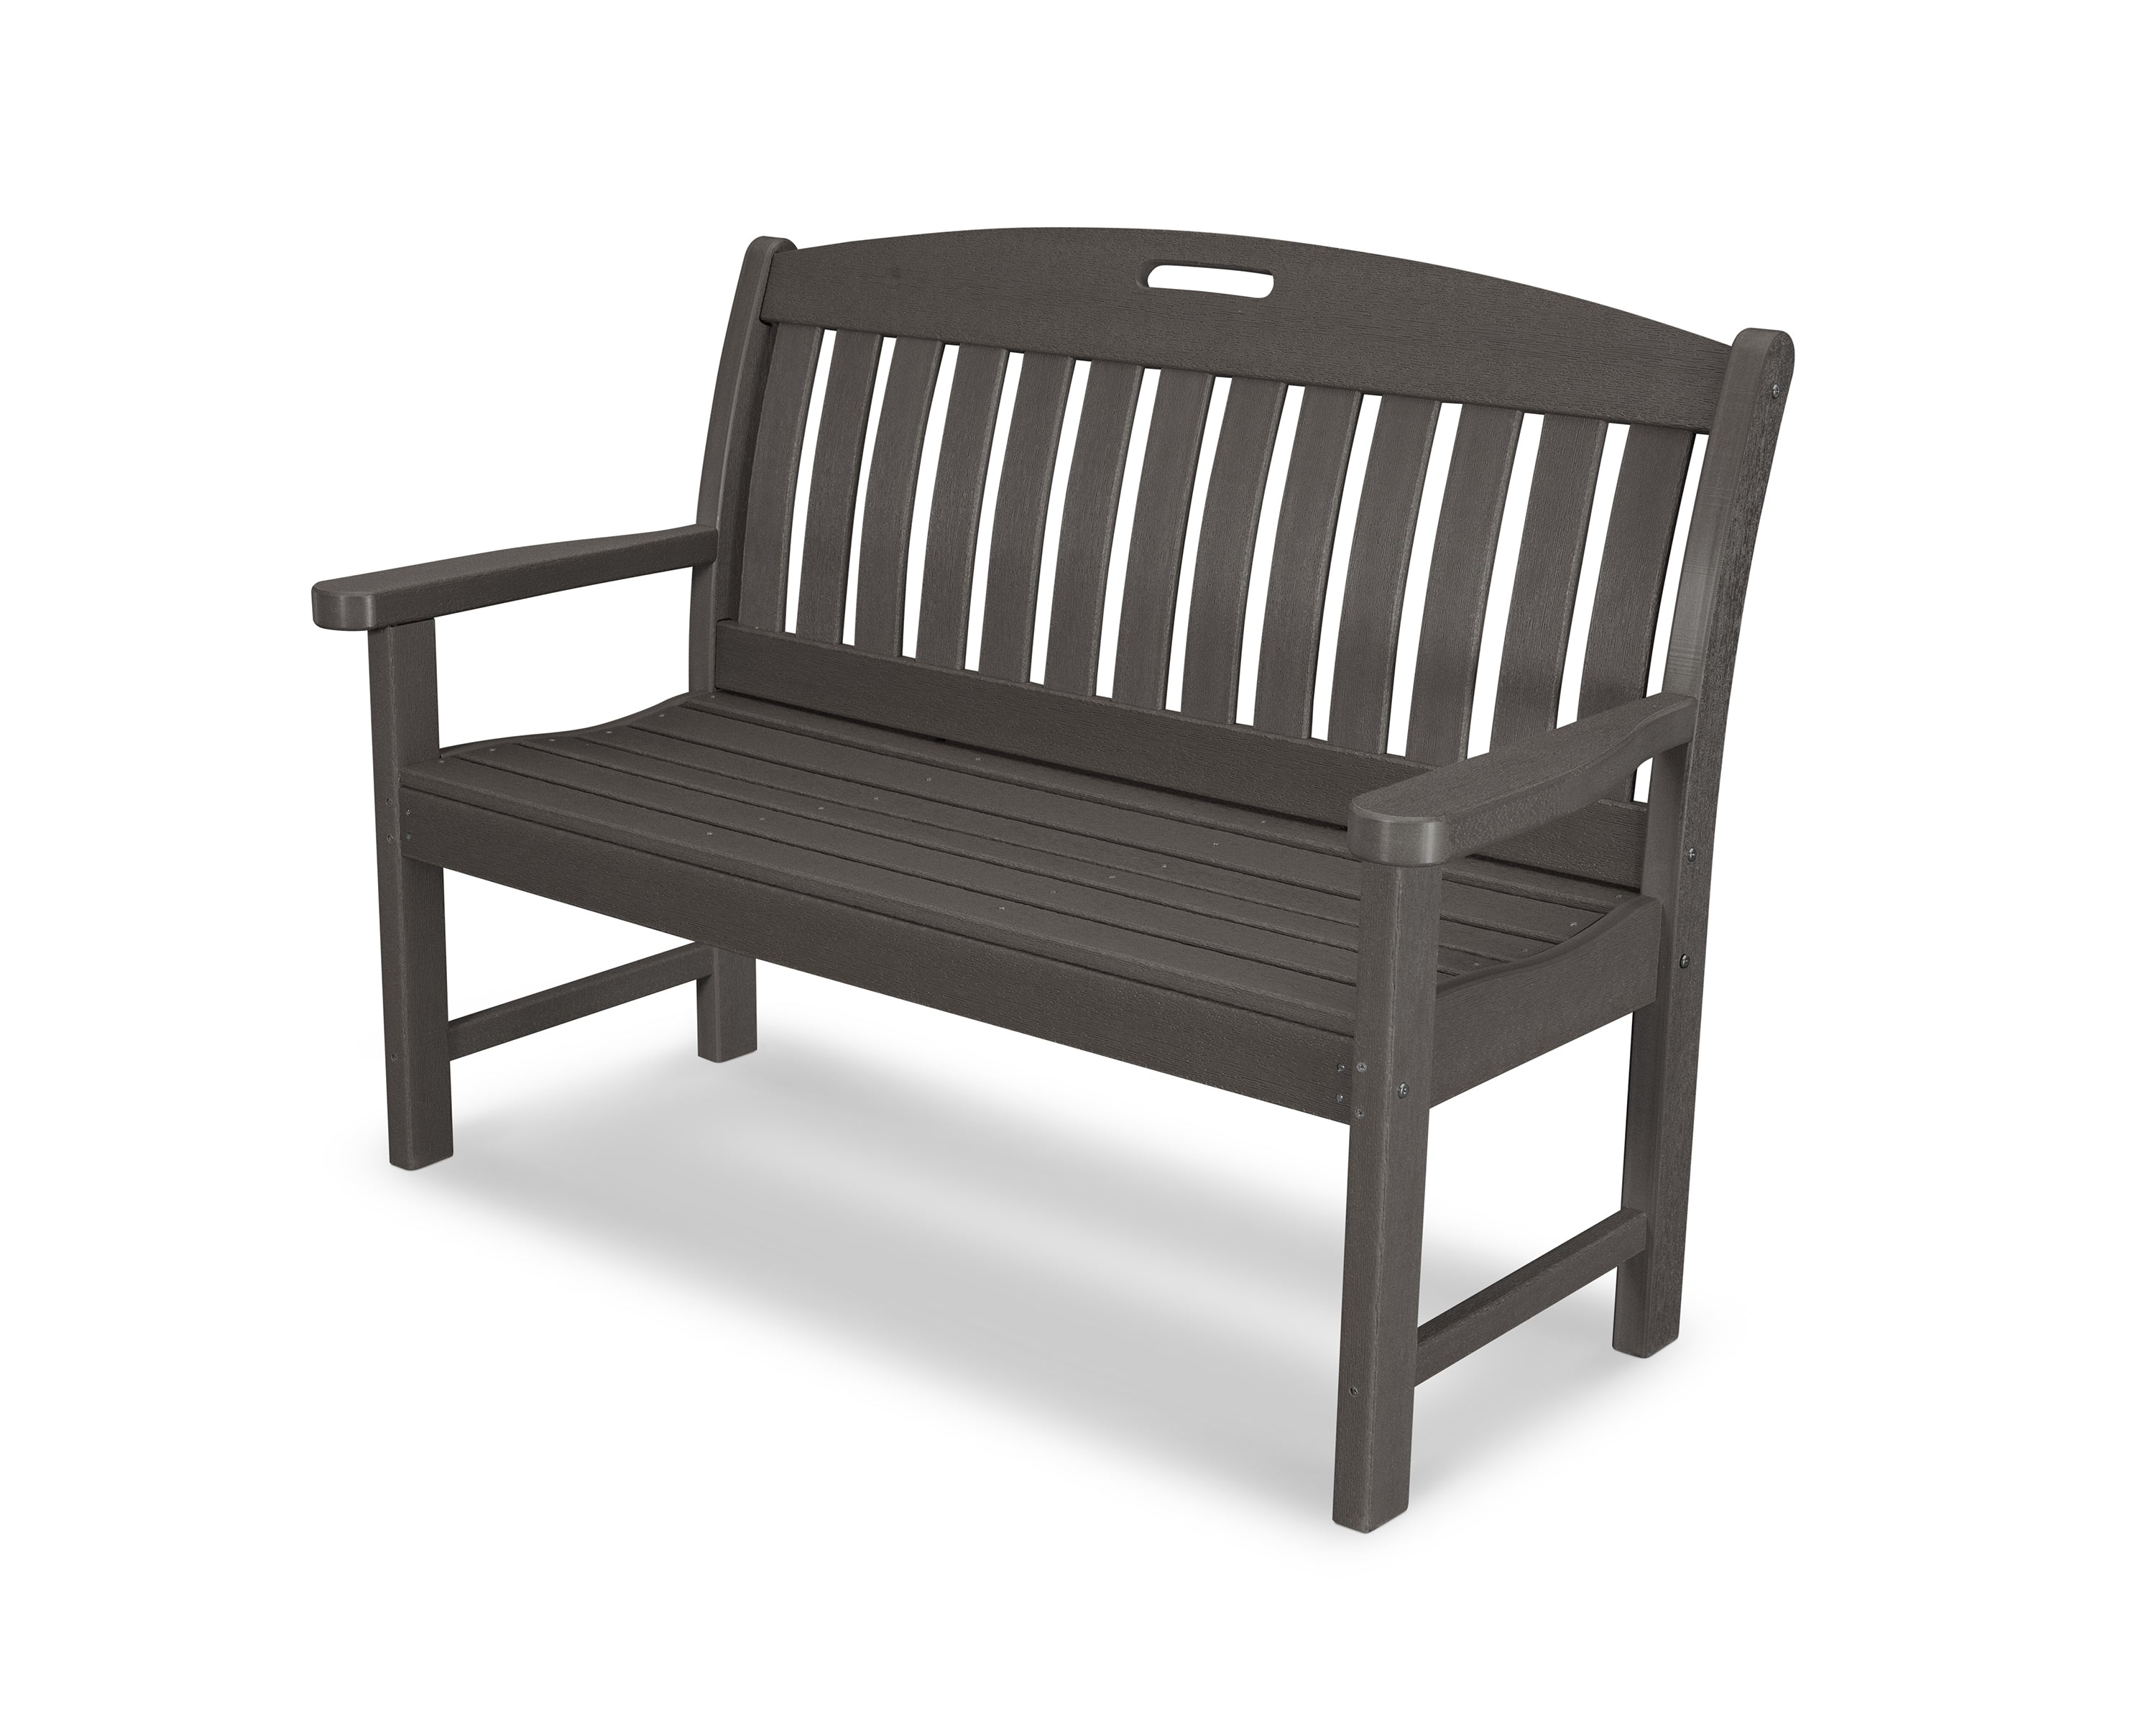 POLYWOOD® Nautical 48" Bench in Vintage Coffee